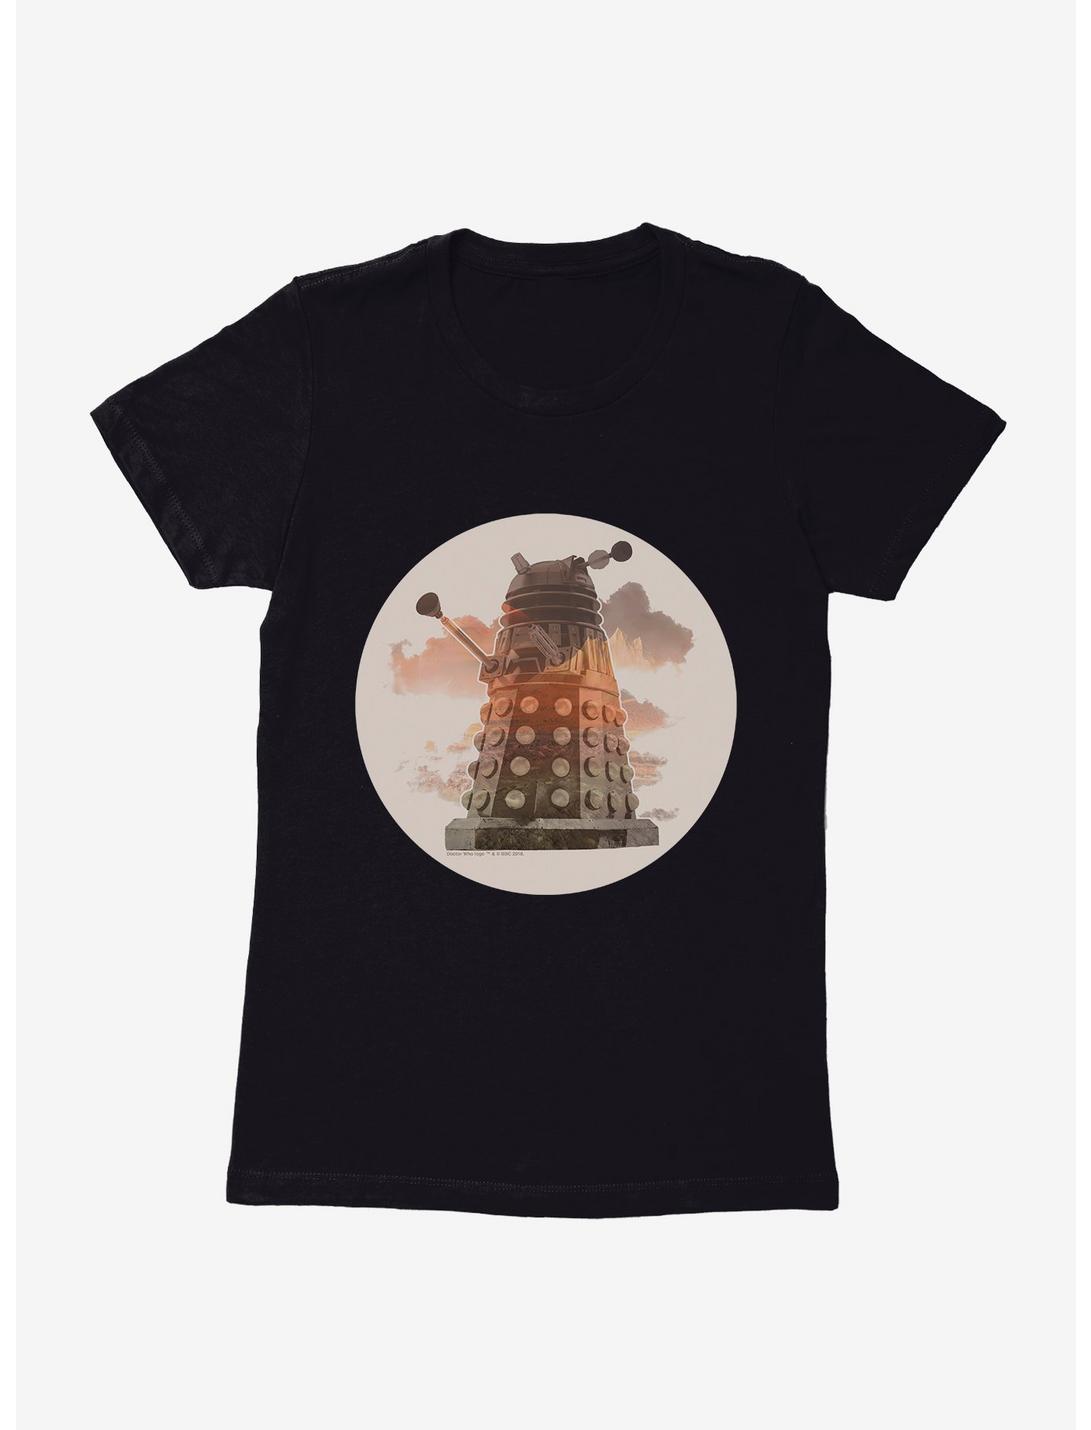 Doctor Who Dalek In The Clouds Womens T-Shirt, BLACK, hi-res